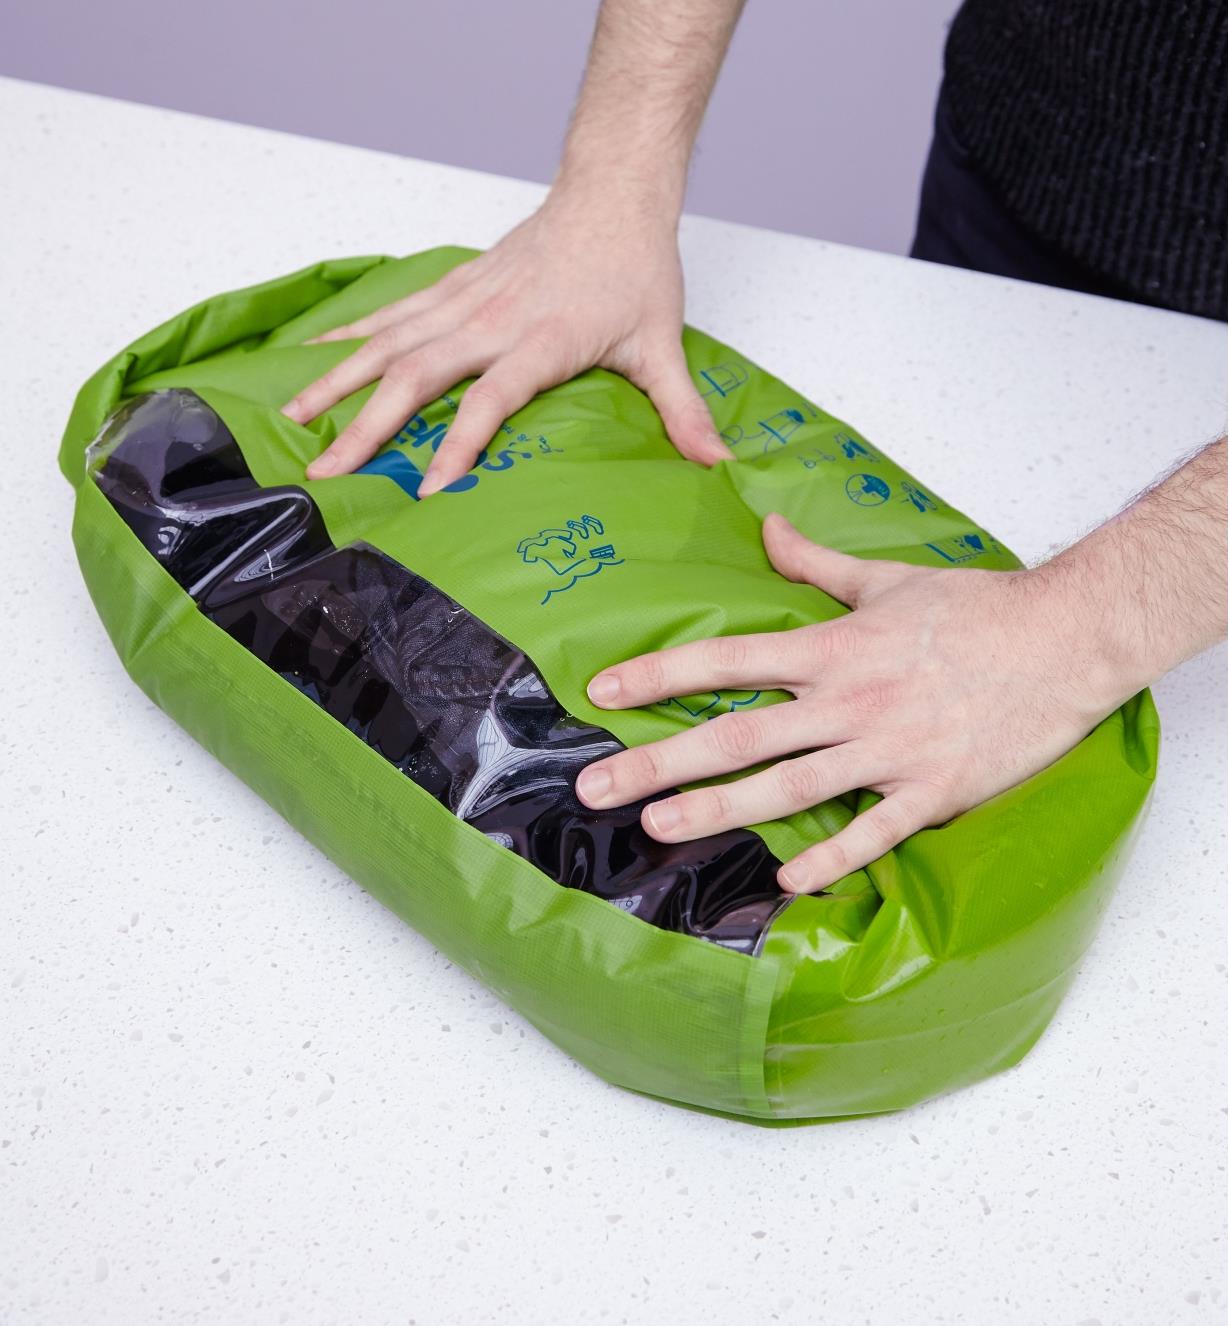 Rubbing the contents of the wash bag against the internal silicone washboard